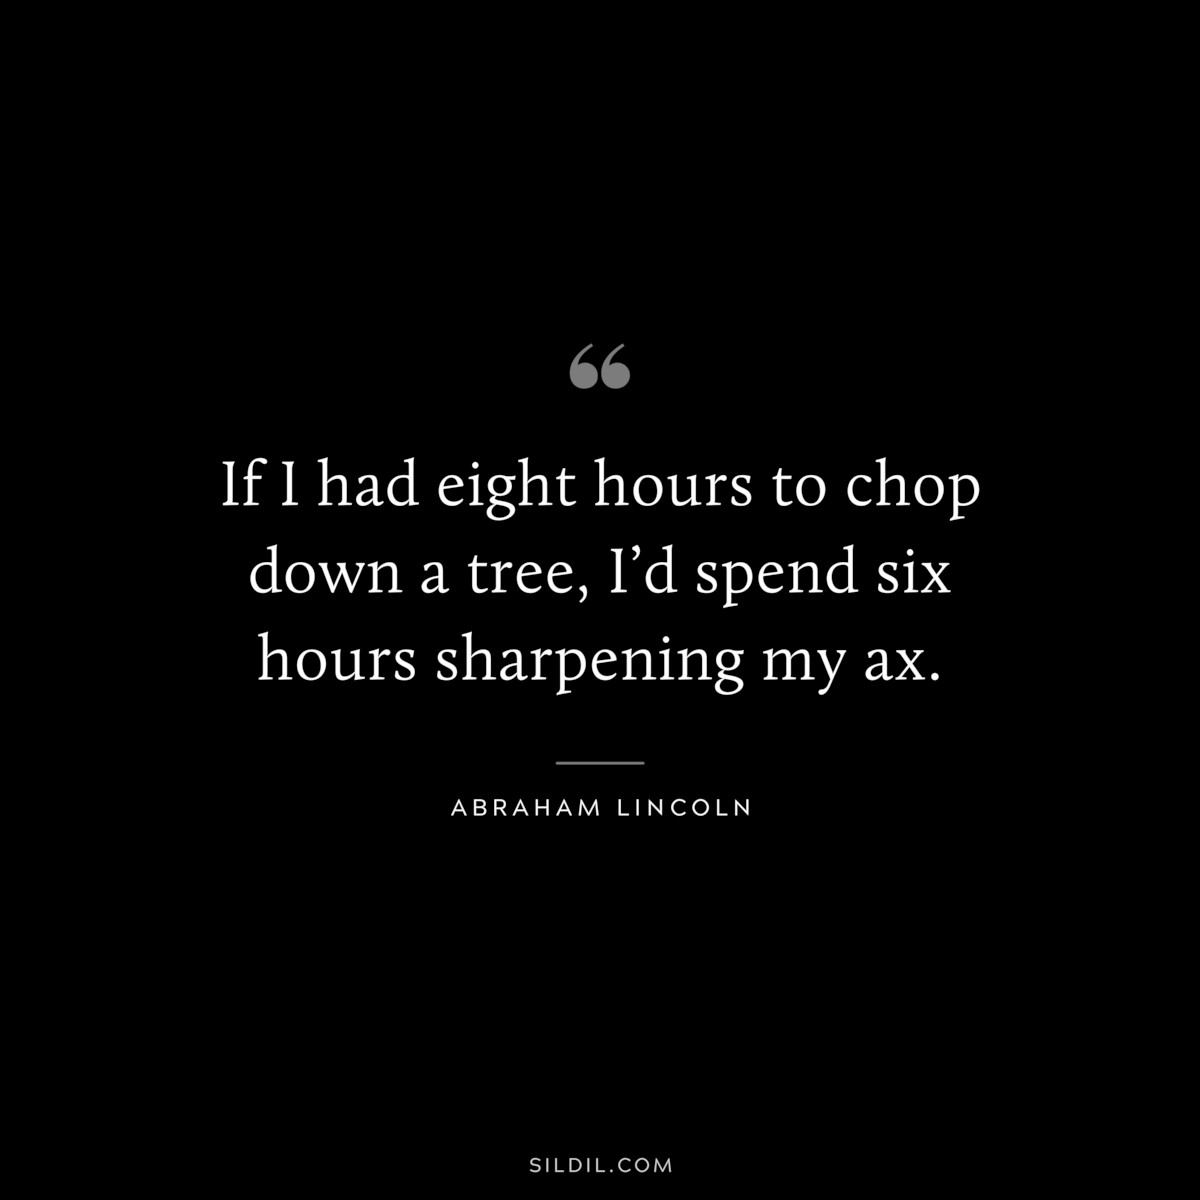 If I had eight hours to chop down a tree, I’d spend six hours sharpening my ax. ― Abraham Lincoln